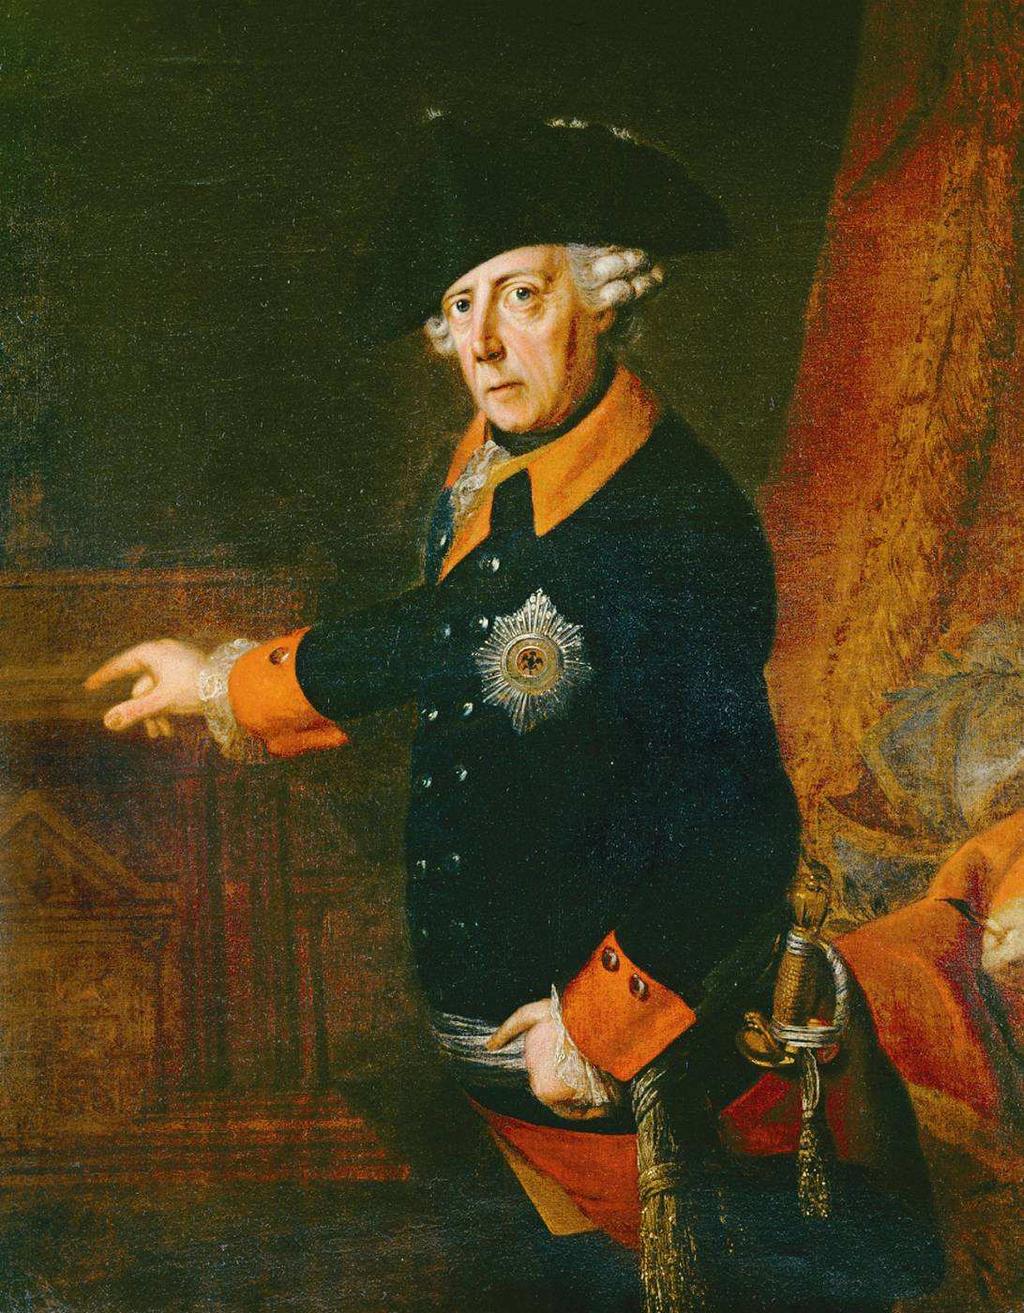 Frederick the Great of Prussia Promotion through merit work and education rather than birth would decide ruled Prussia Religious toleration for